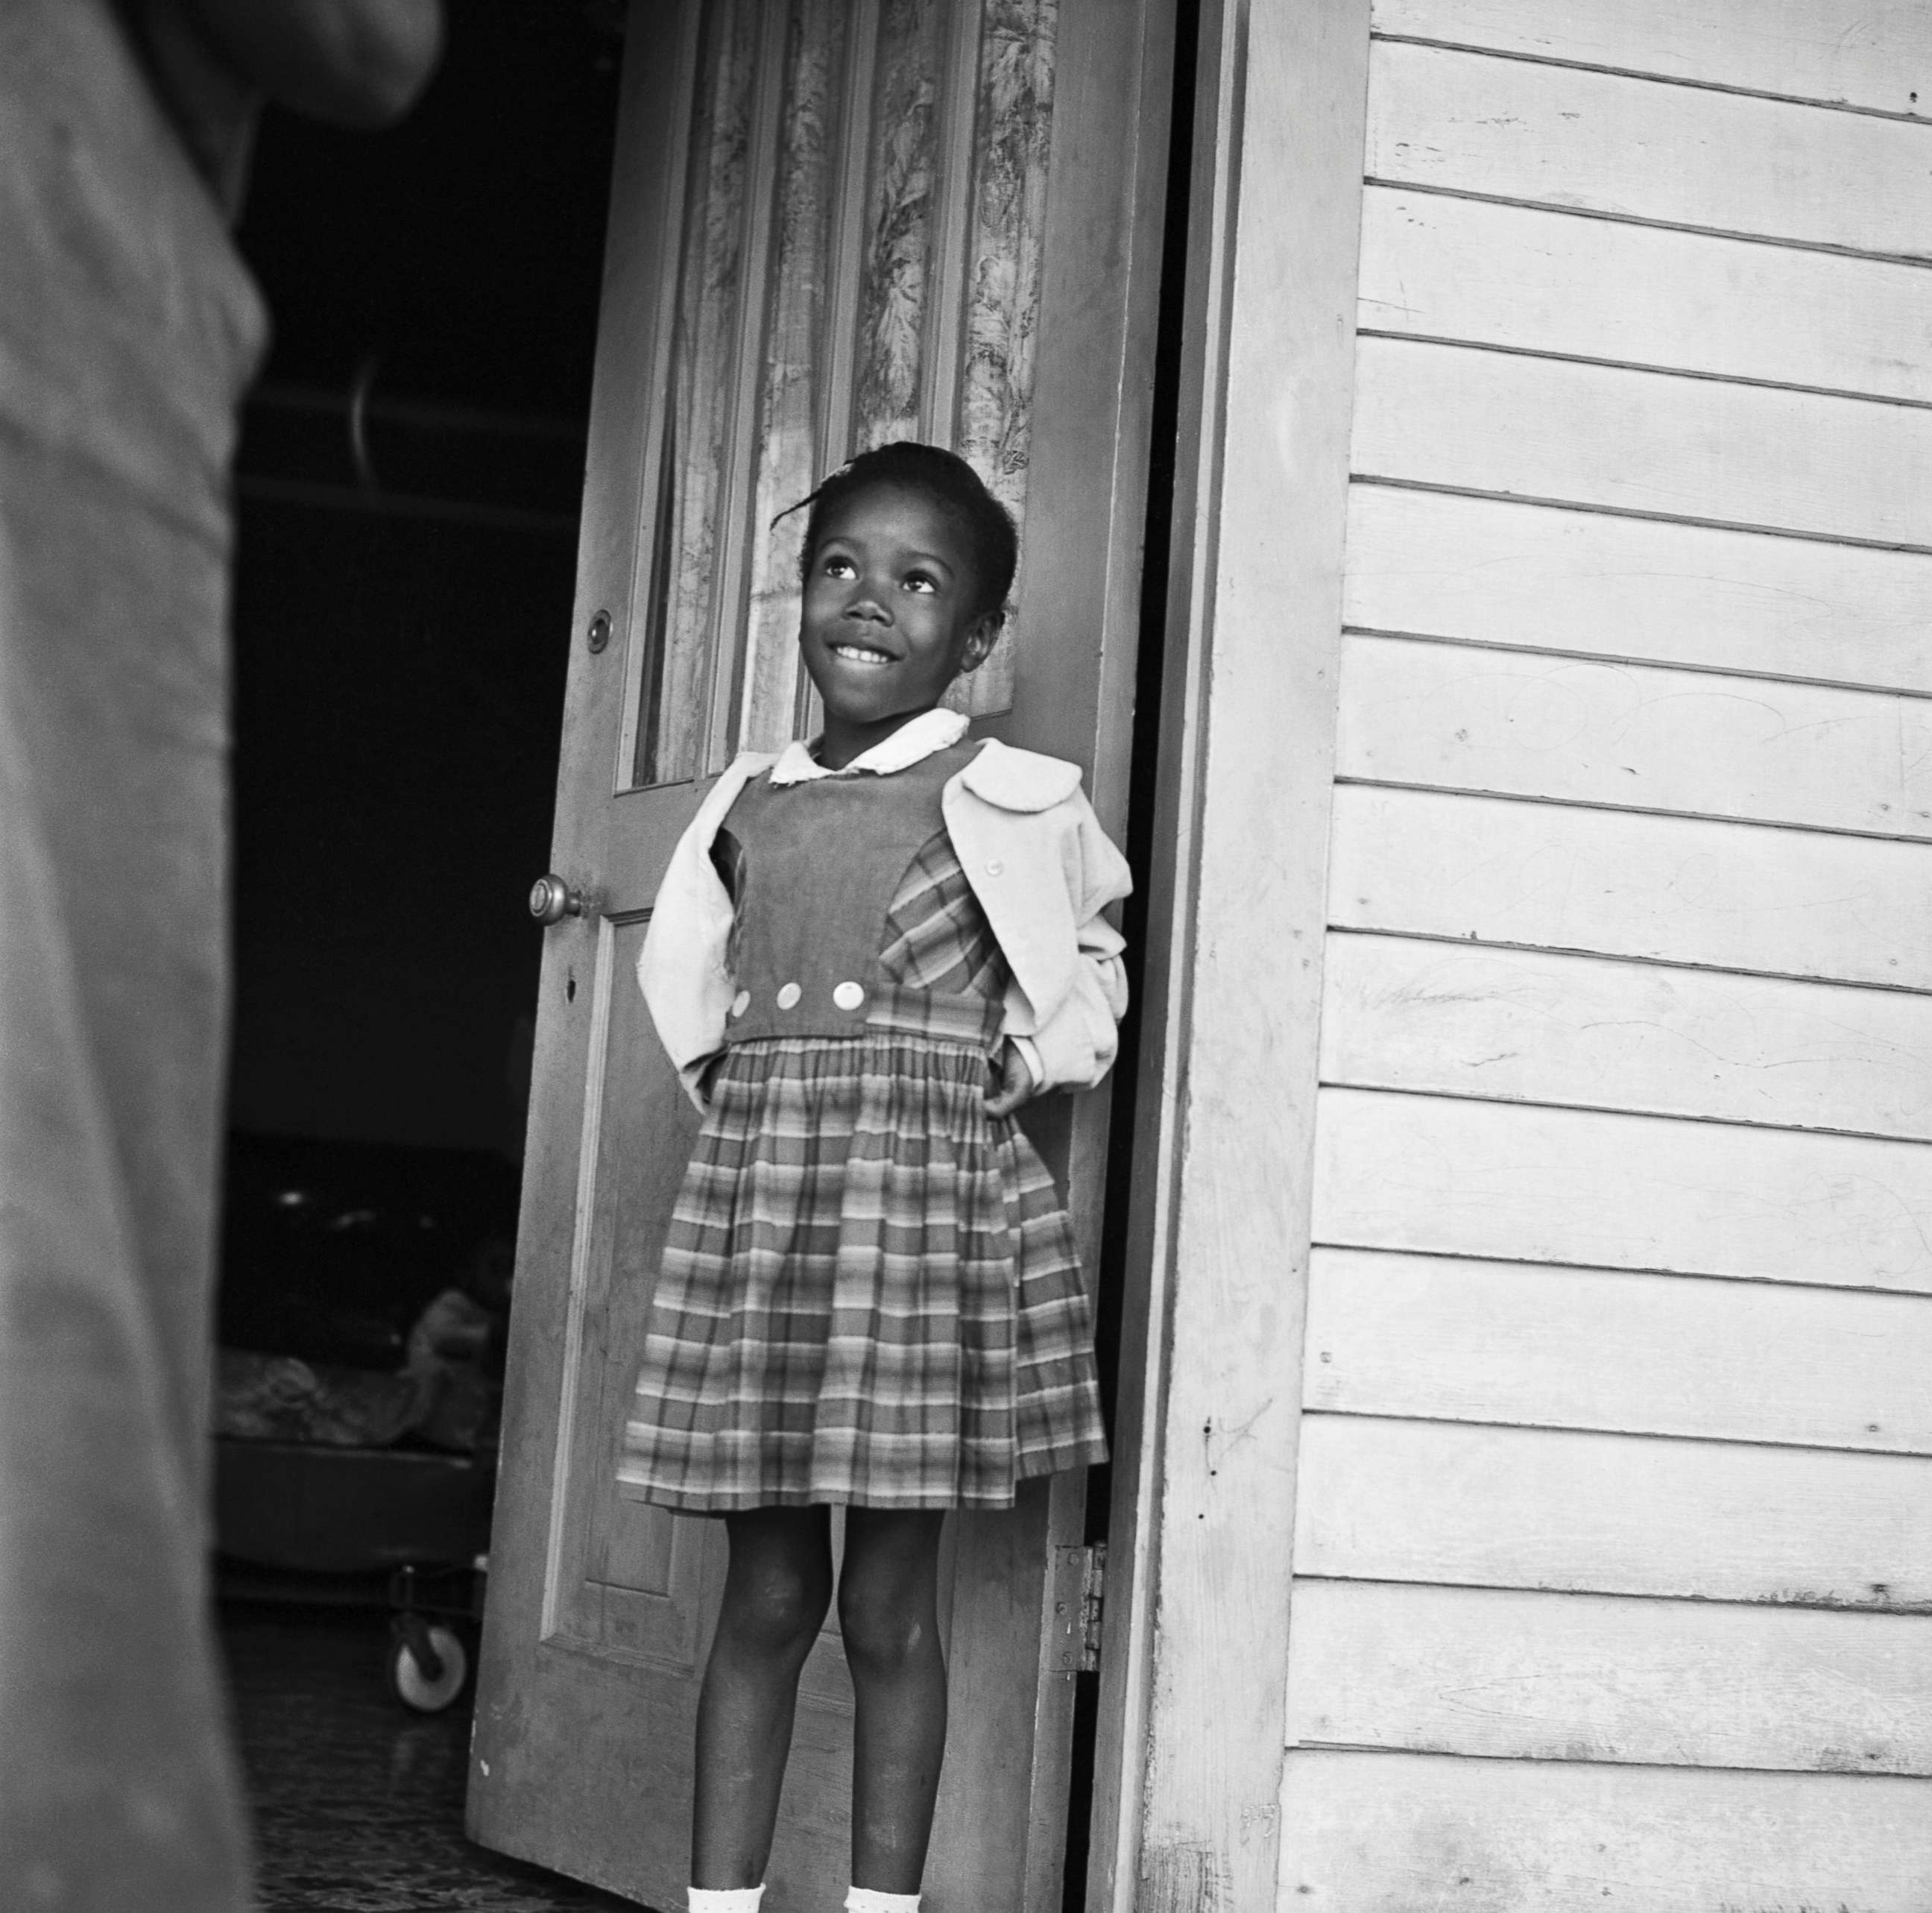 PHOTO: Ruby Nell Bridges at age 6, was the first African American child to attend William Franz Elementary School in New Orleans after Federal courts ordered the desegregation of public schools.